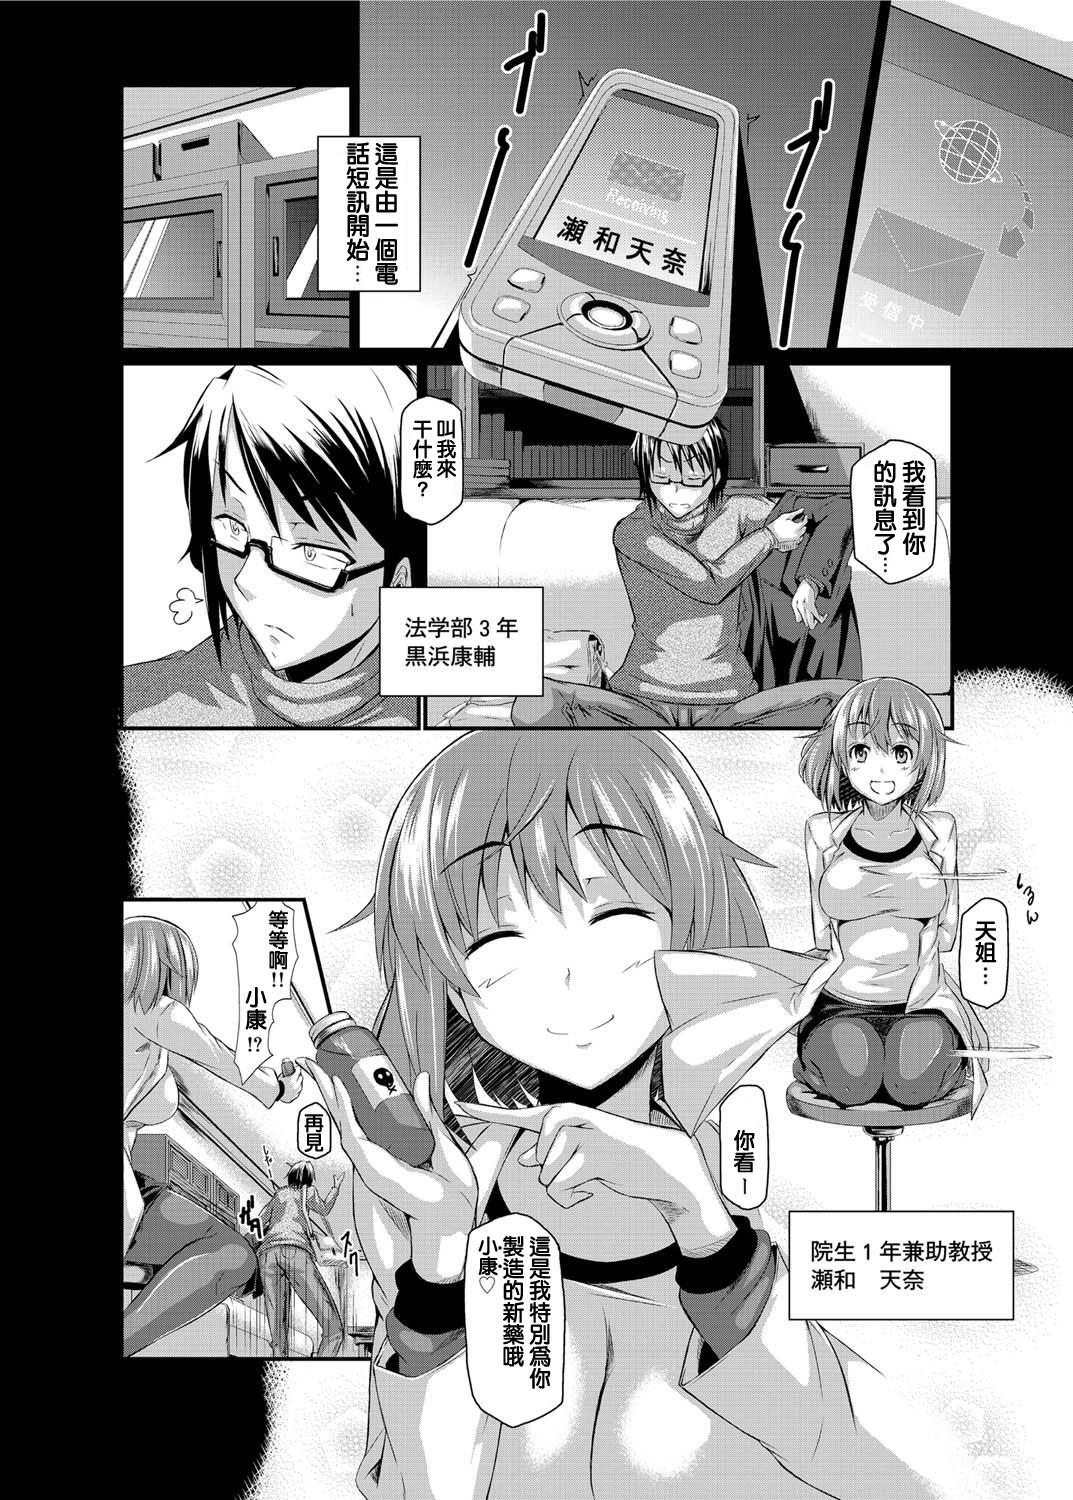 [Kuro no Miki] The aphrodisiac of love started it all(chinese) [純愛K個人漢化][黒ノ樹]キッカケは恋の媚薬(キャノプリcomic 2011月1月号)